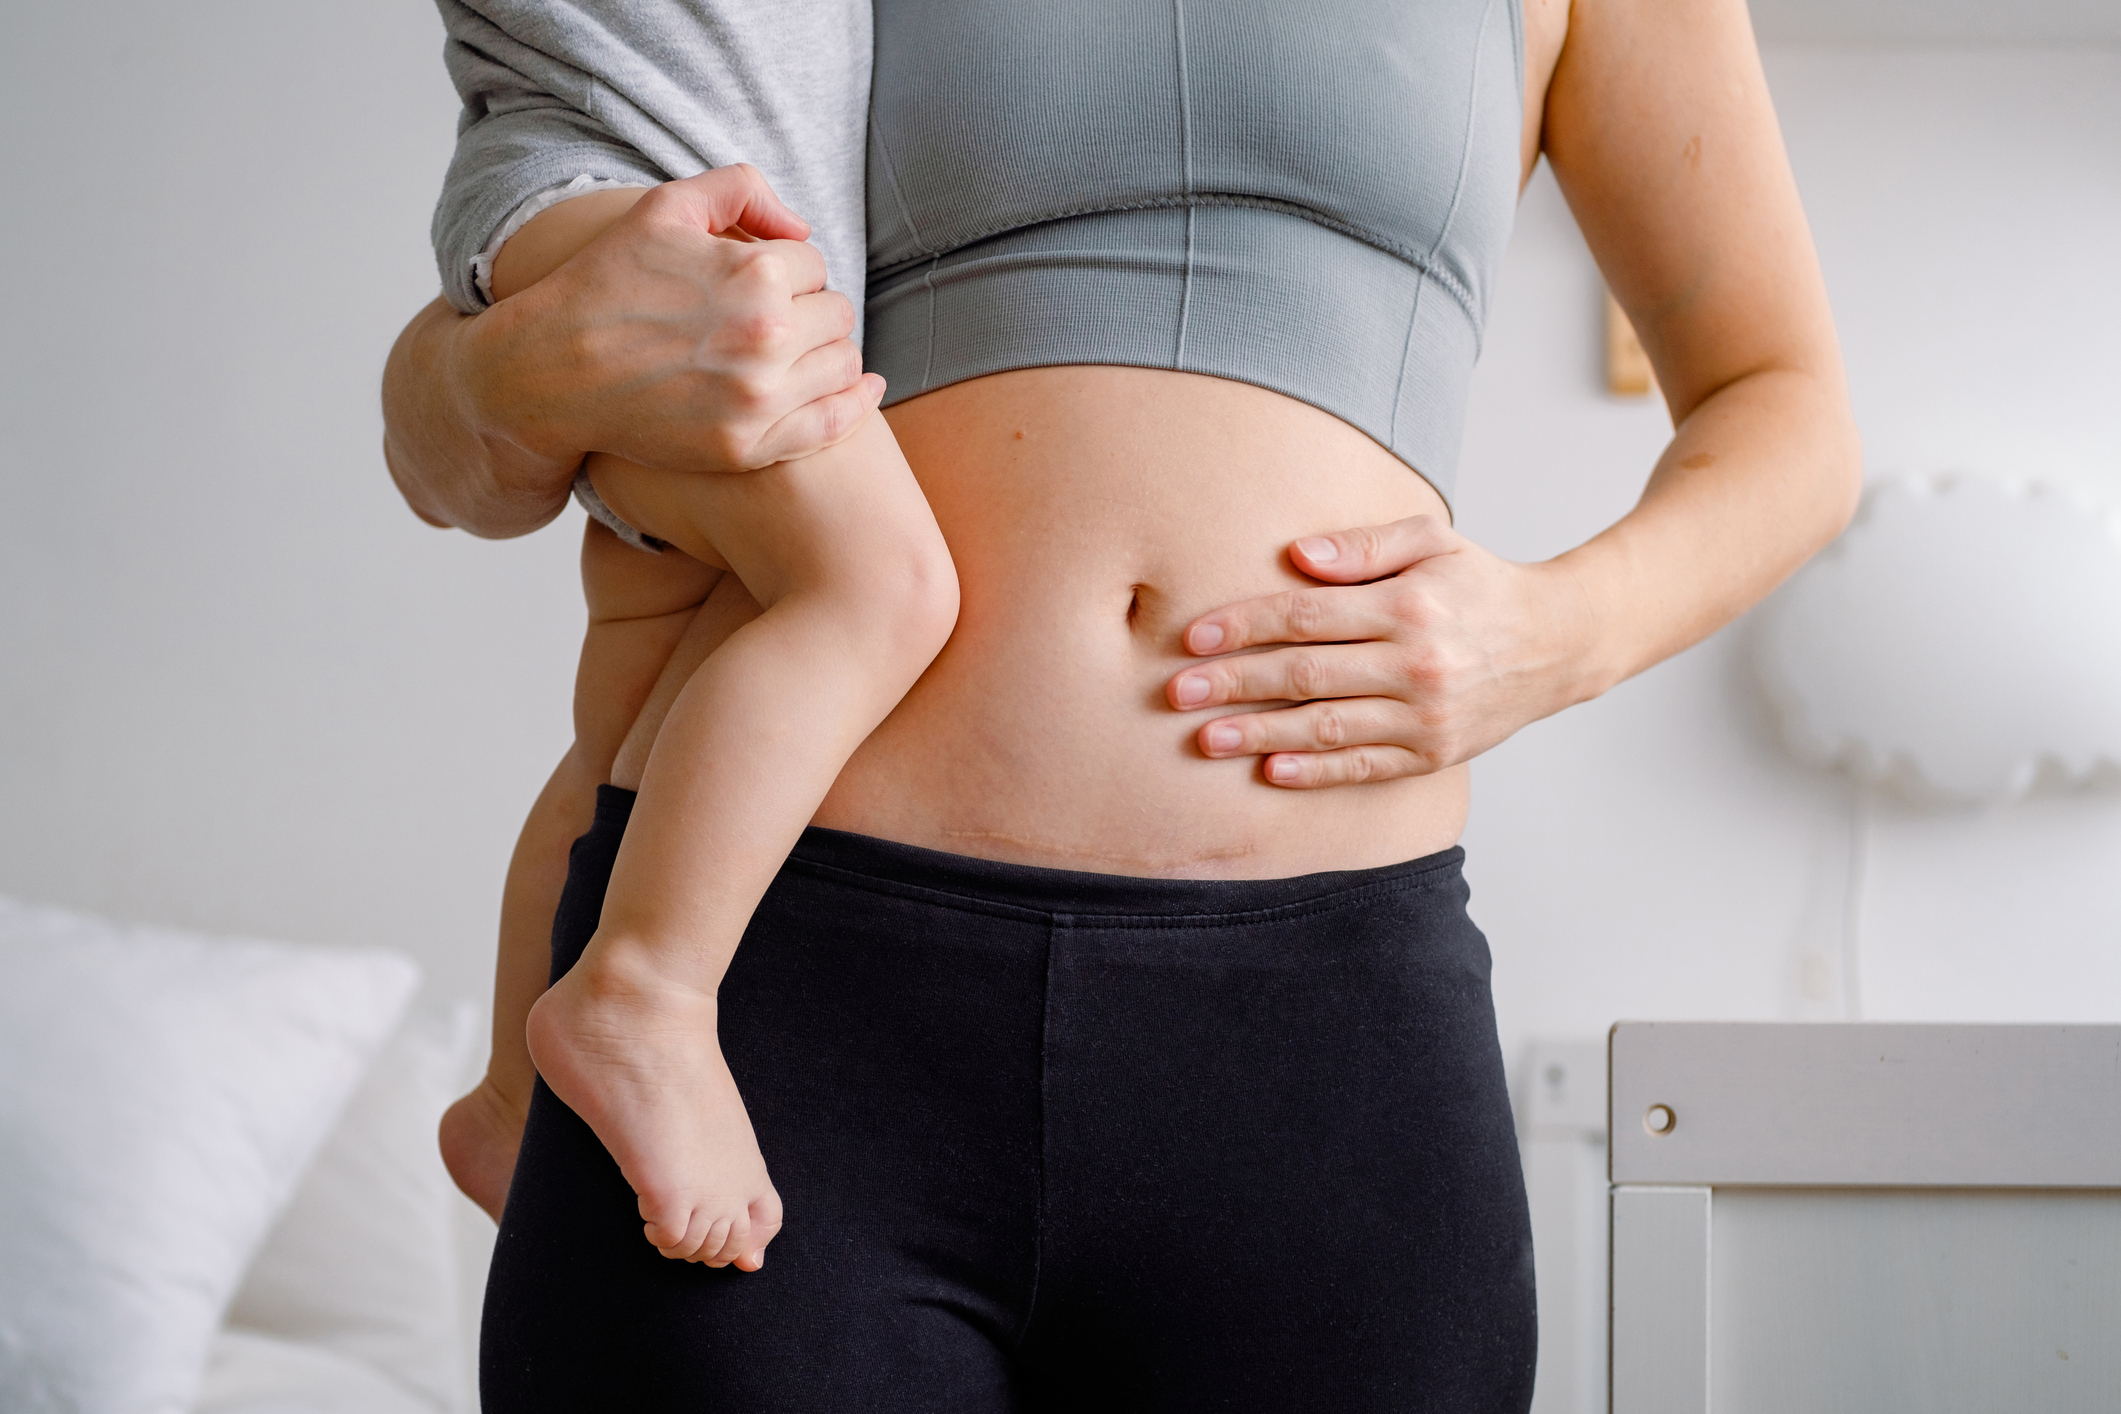 Post-Pregnancy Belly: What to Expect With Your Post-Pregnancy Stomach